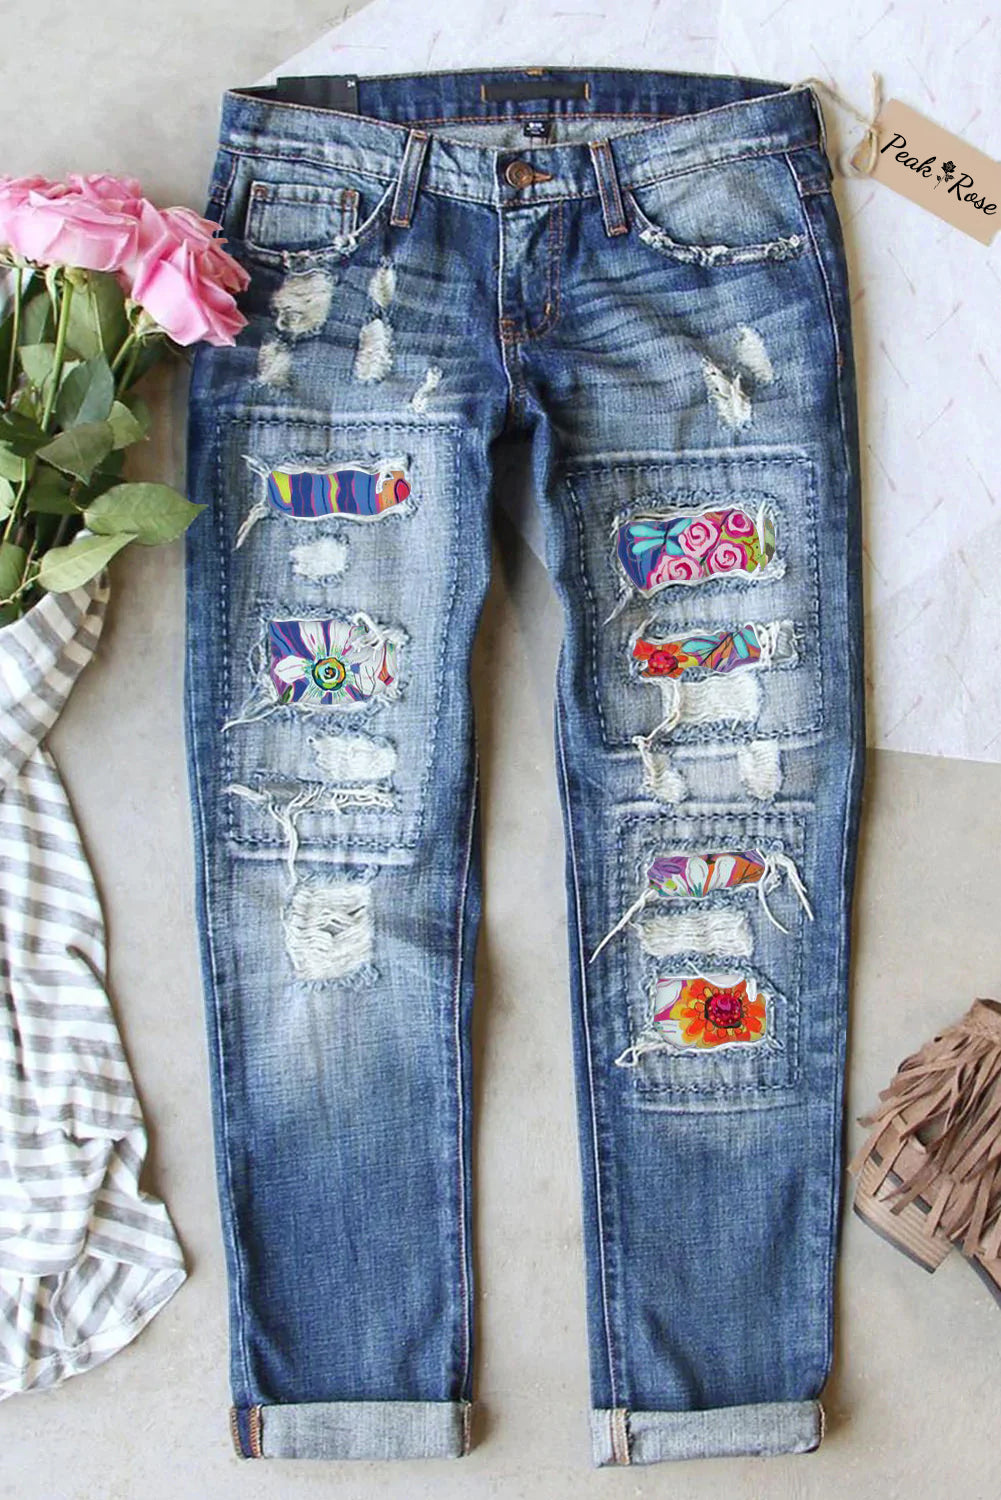 Happy Easter Day Bunnies Paintings Printed Ripped Denim Jeans